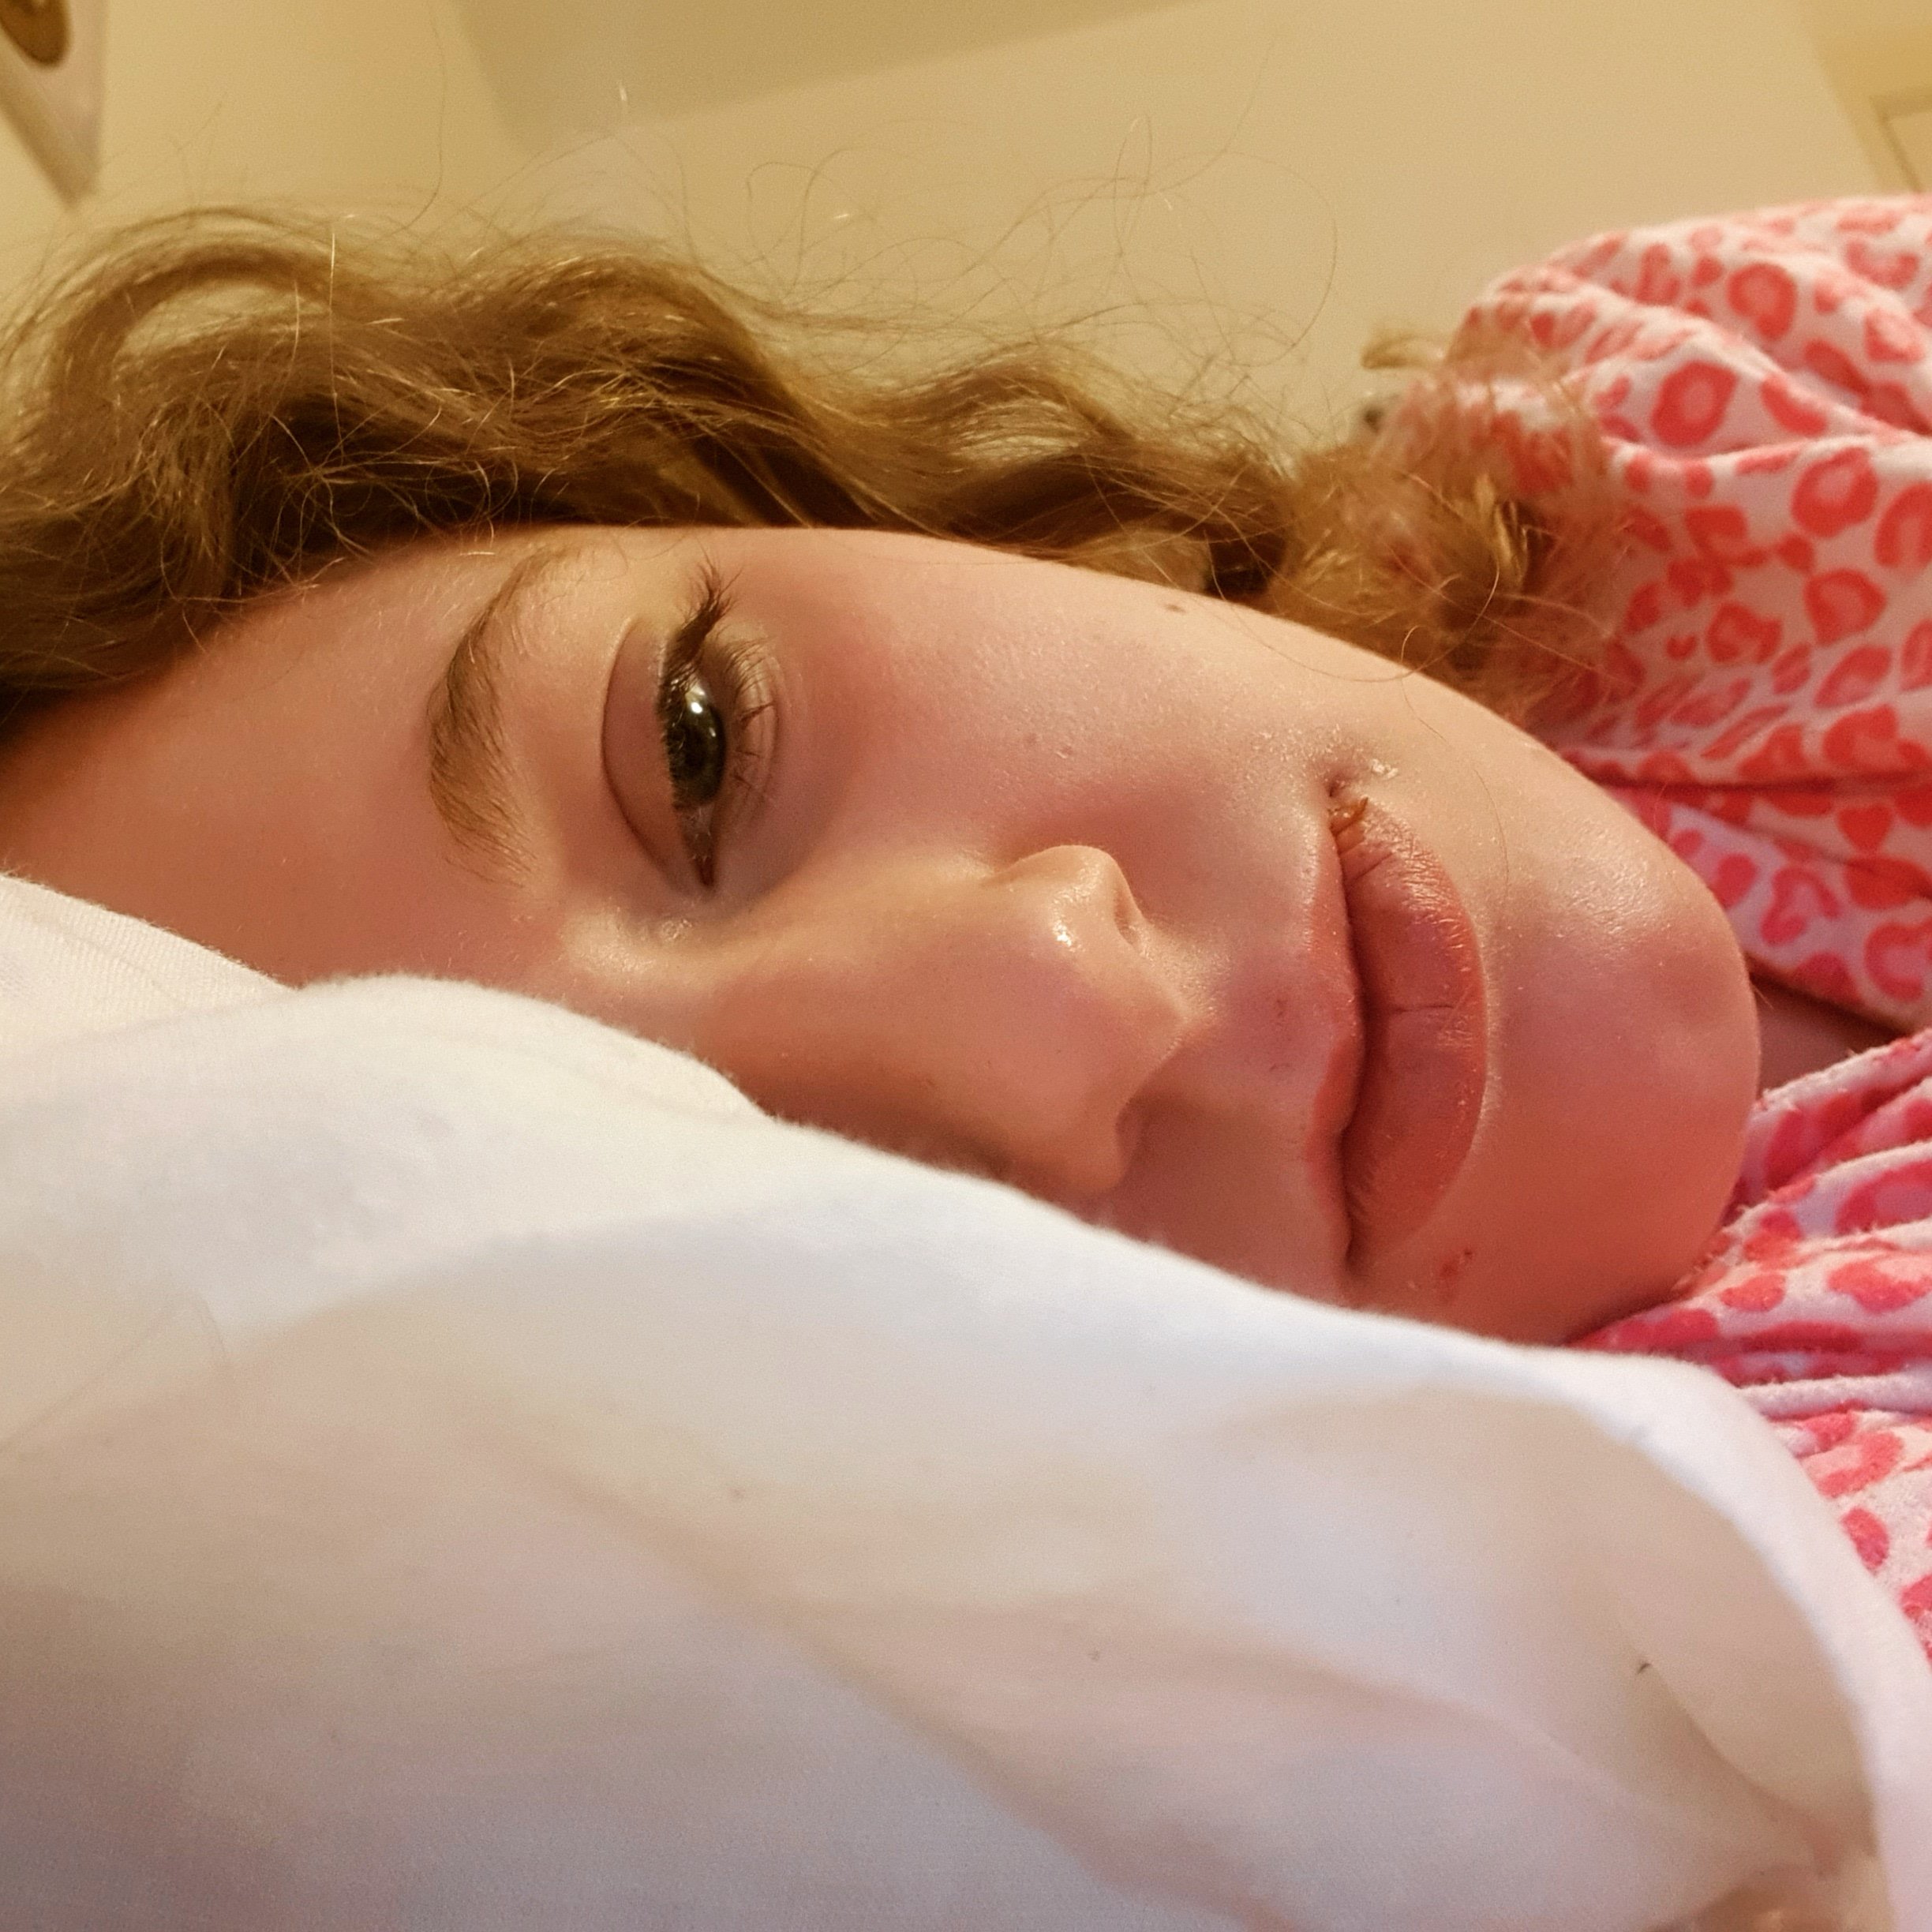 Lay in bed. Taken lying on my side facing the camera with my phone propped up on pillows. I'm wearing pink leopard print pyjamas & my hair is loose.